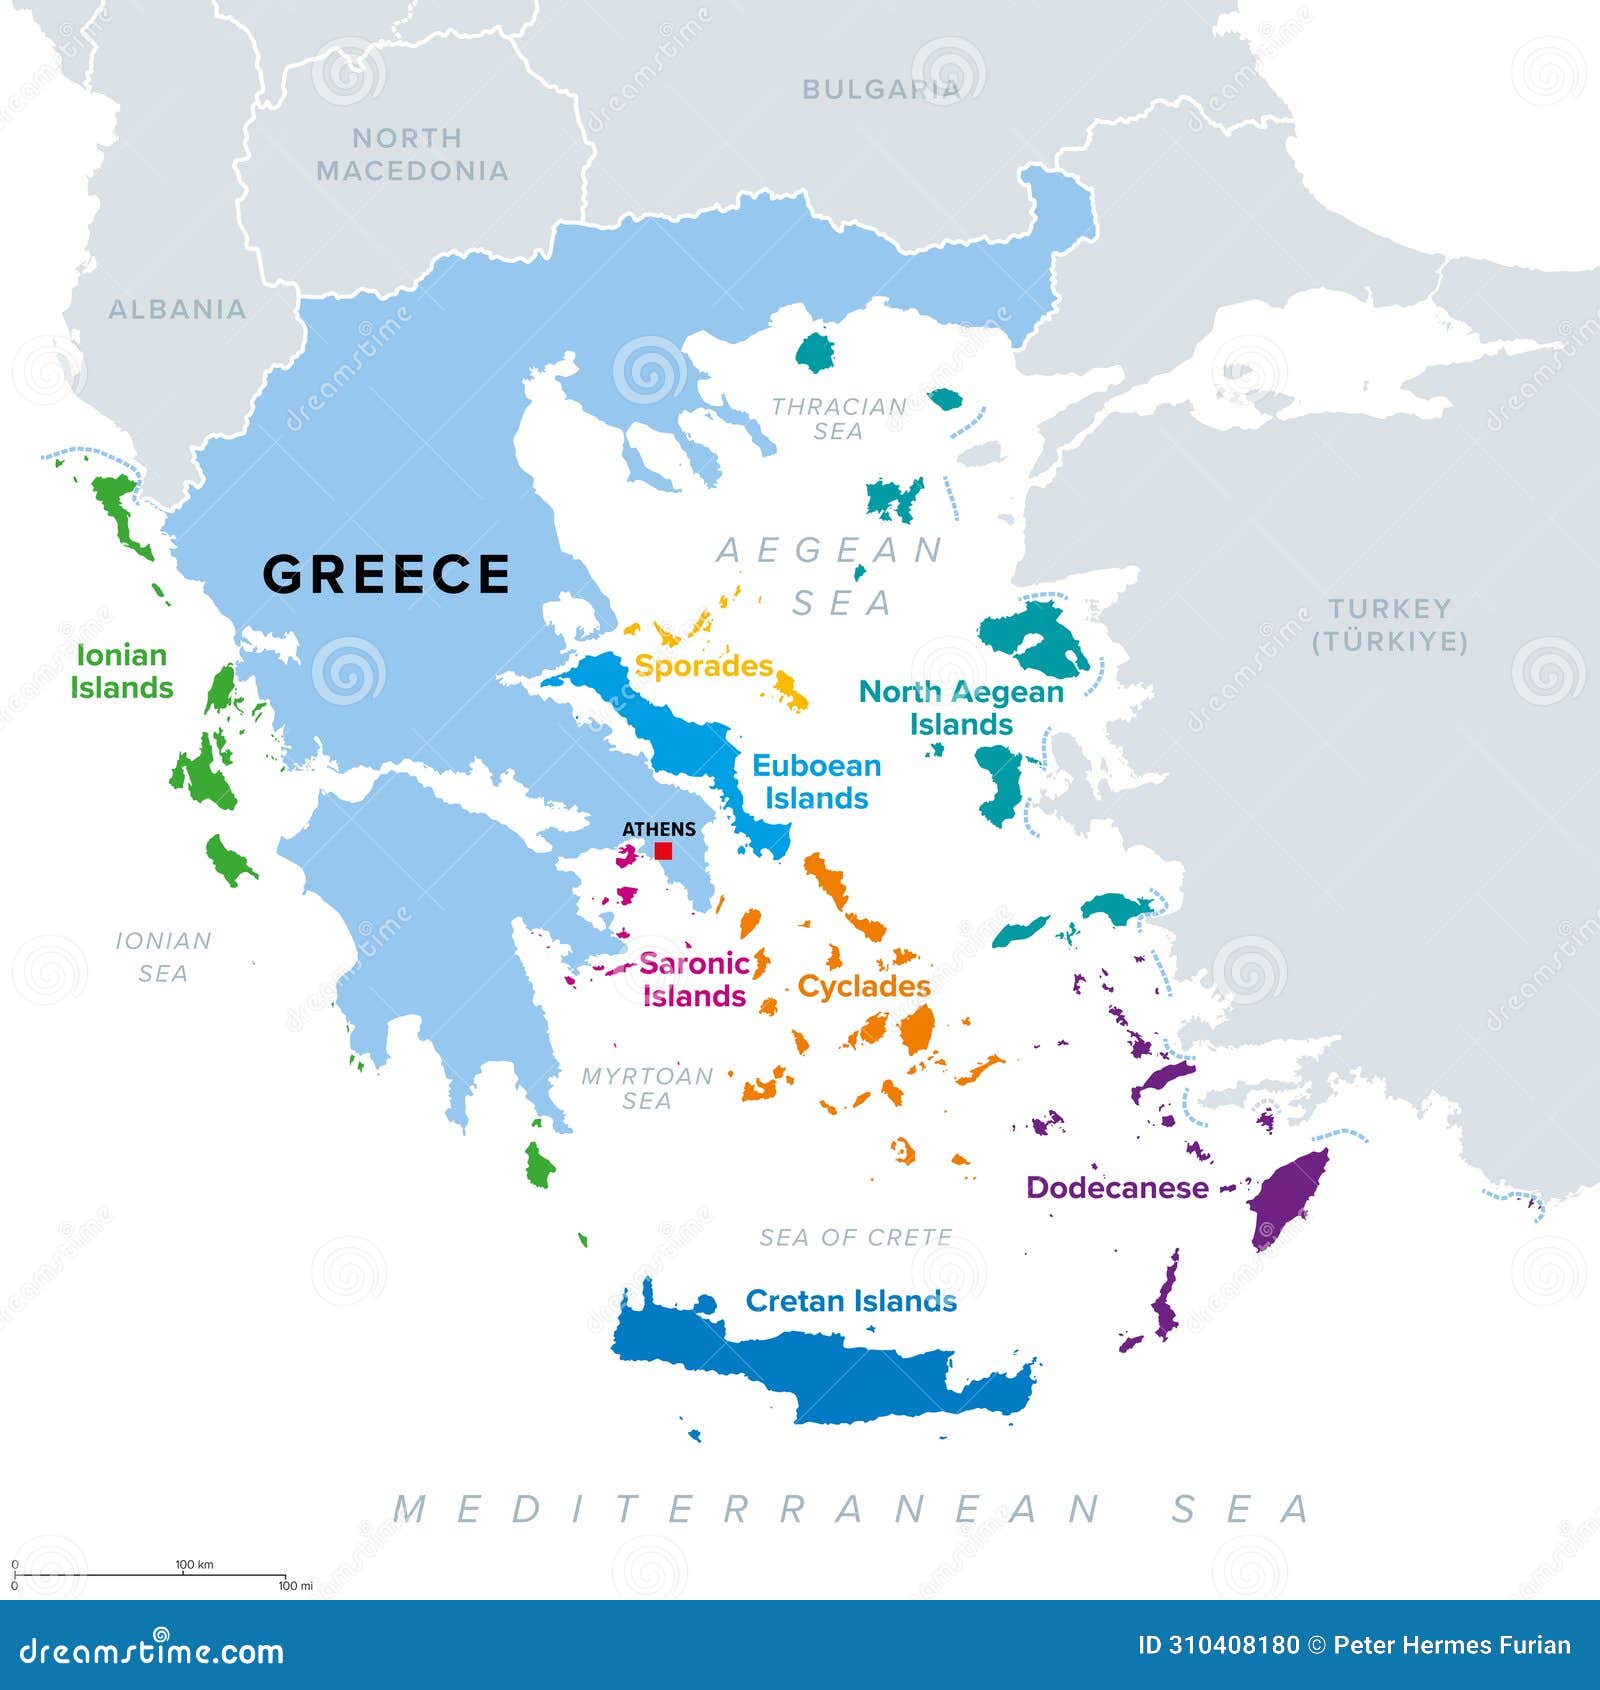 greek island groups, islands of greece grouped into clusters, political map